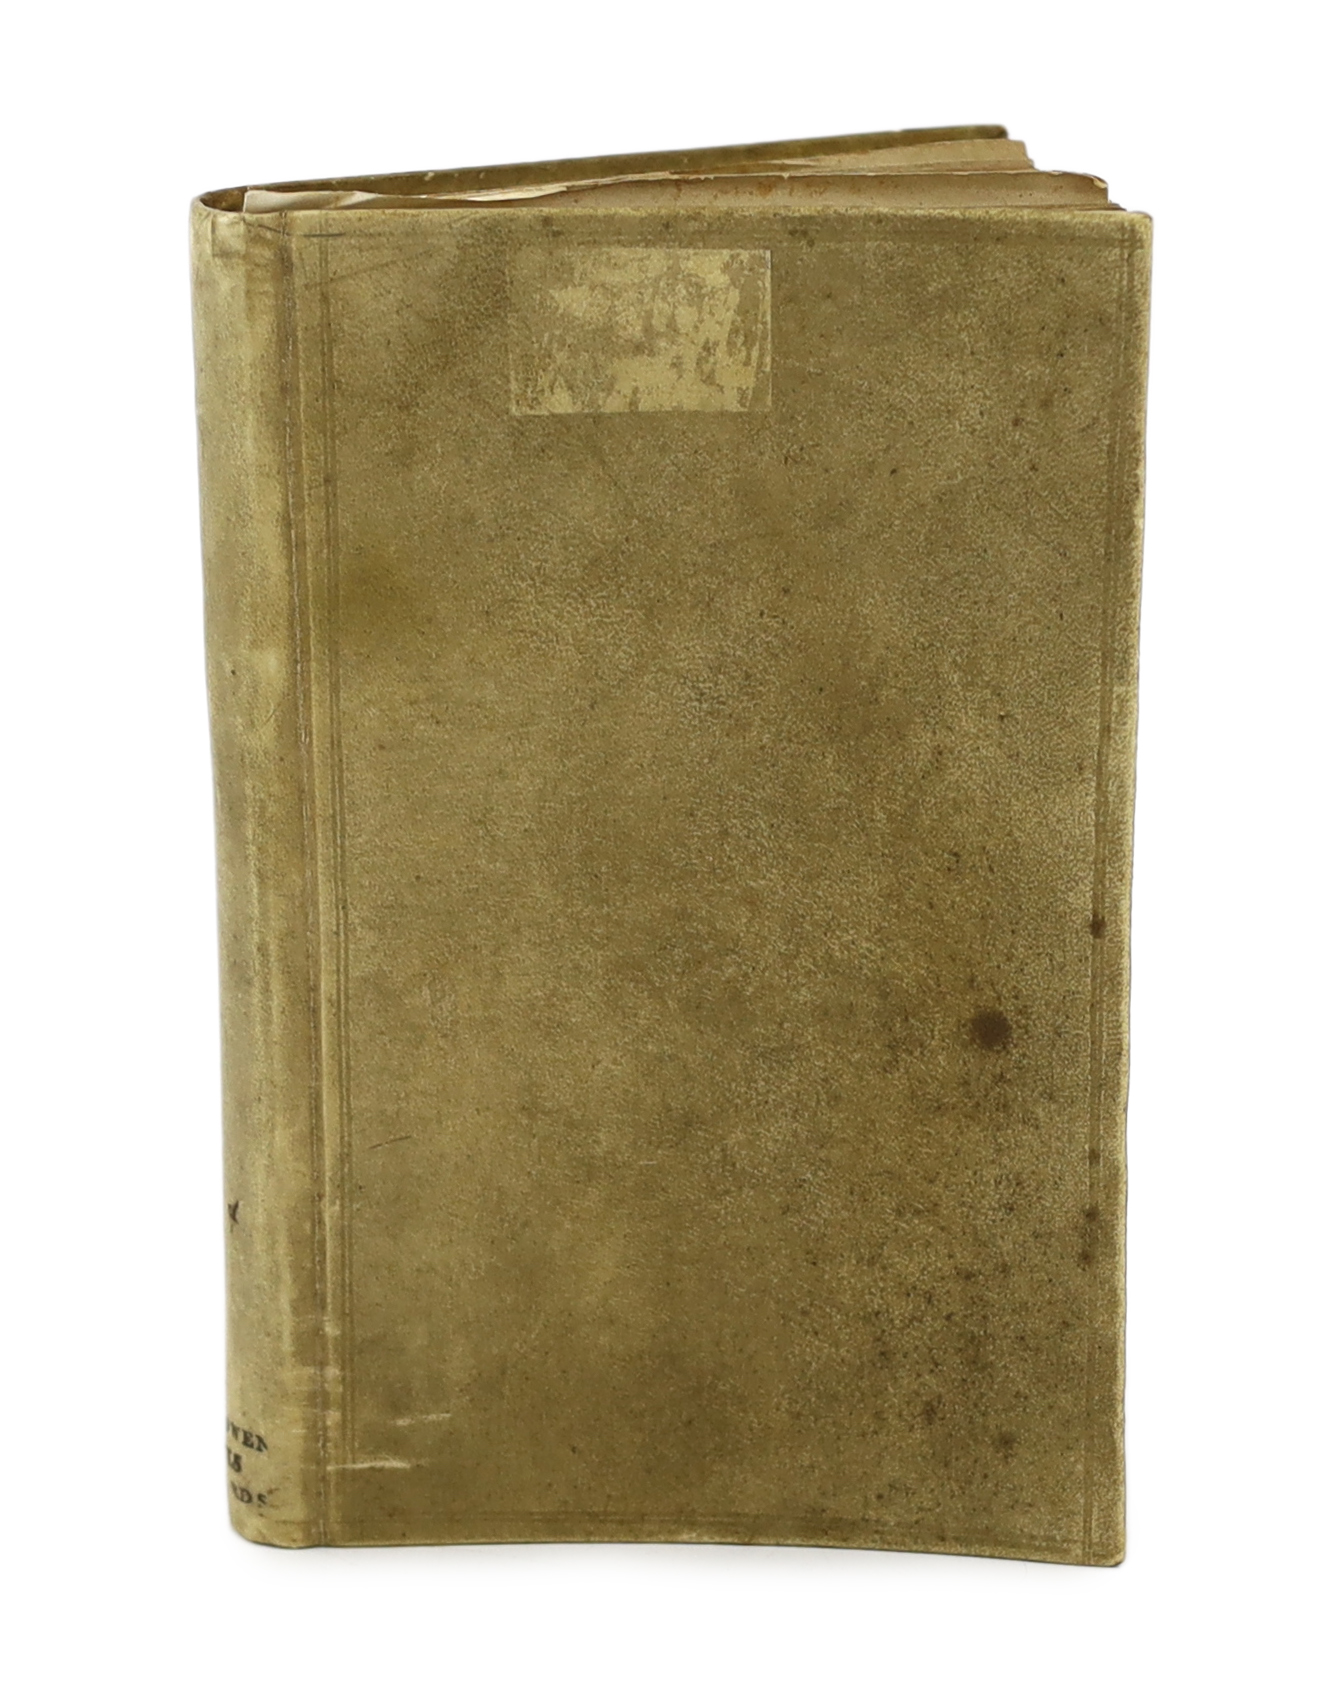 Journal of Emily Eden (1797-1869), novelist and traveller; 1 January - 29 March 1828, Paper book with marbled edges in a parchment binding, 18 x 12 cm, with label of the supplier J Bowen, wholesale stationer, 315 Oxford